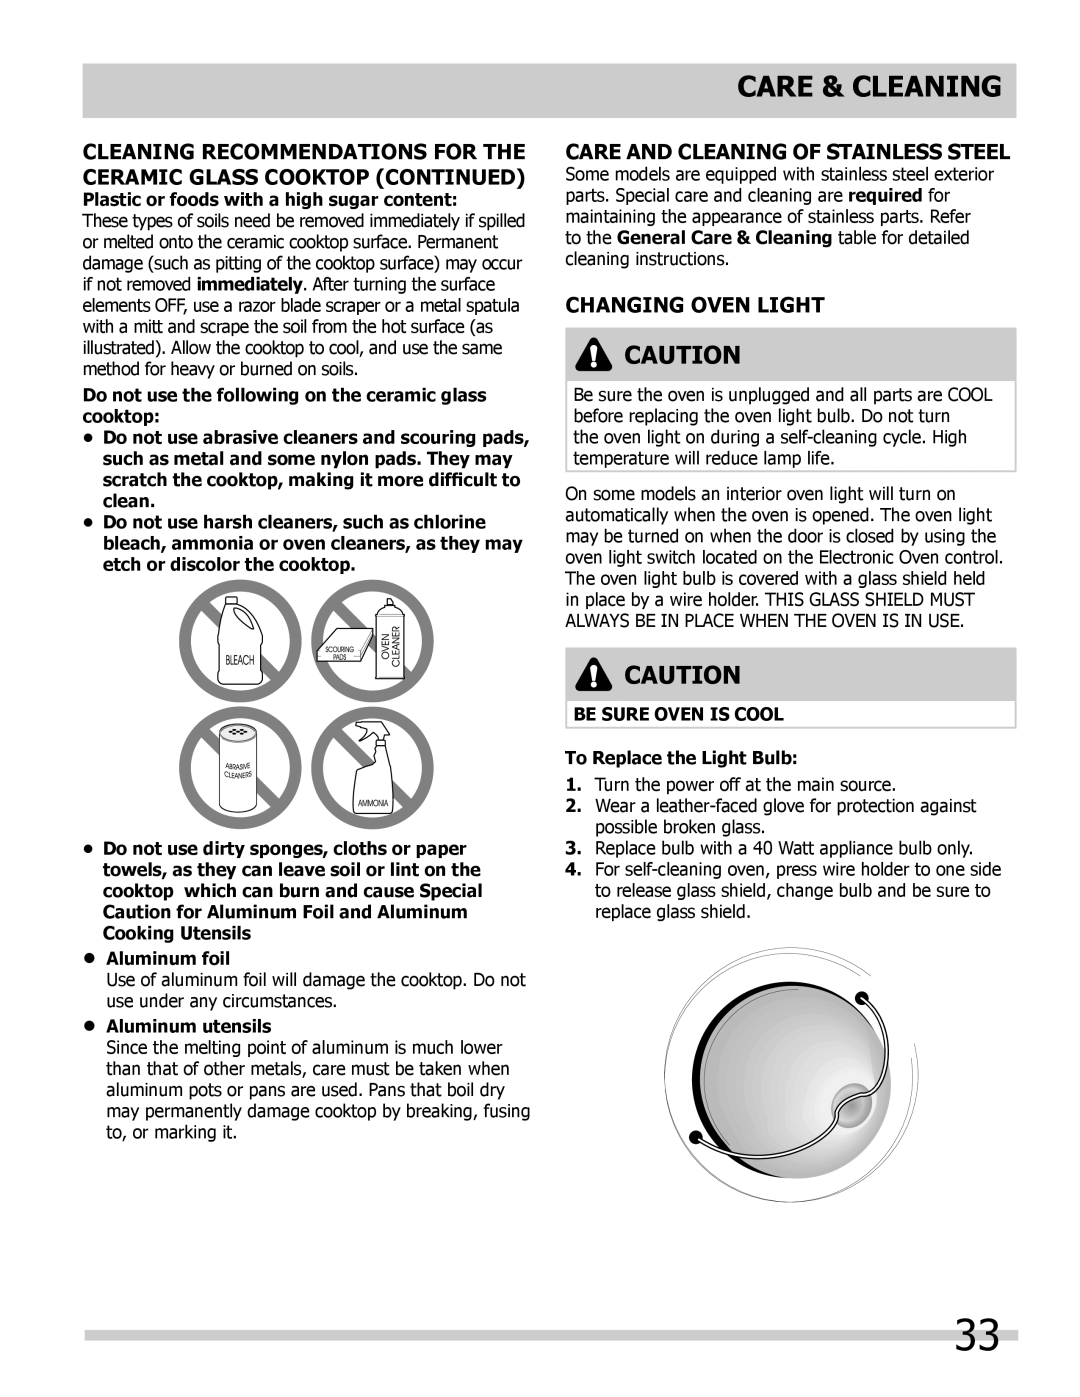 Frigidaire 318205205 manual Cleaning recommendations for the ceramic glass cooktop continued, Changing oven light 